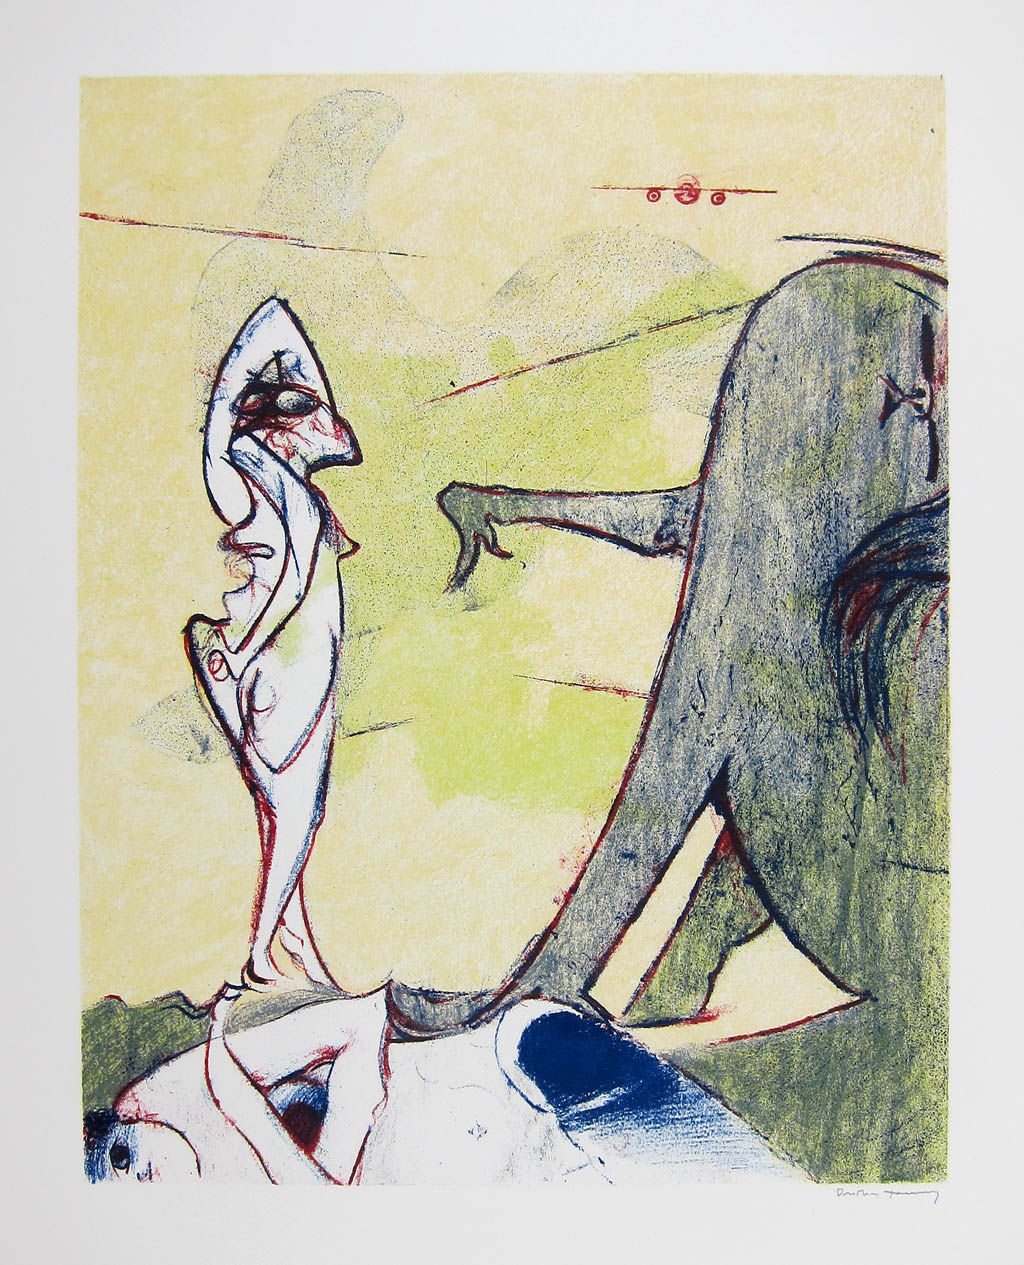 Dorothea Tanning - Untitled (for CNAC) - 1974 color lithograph